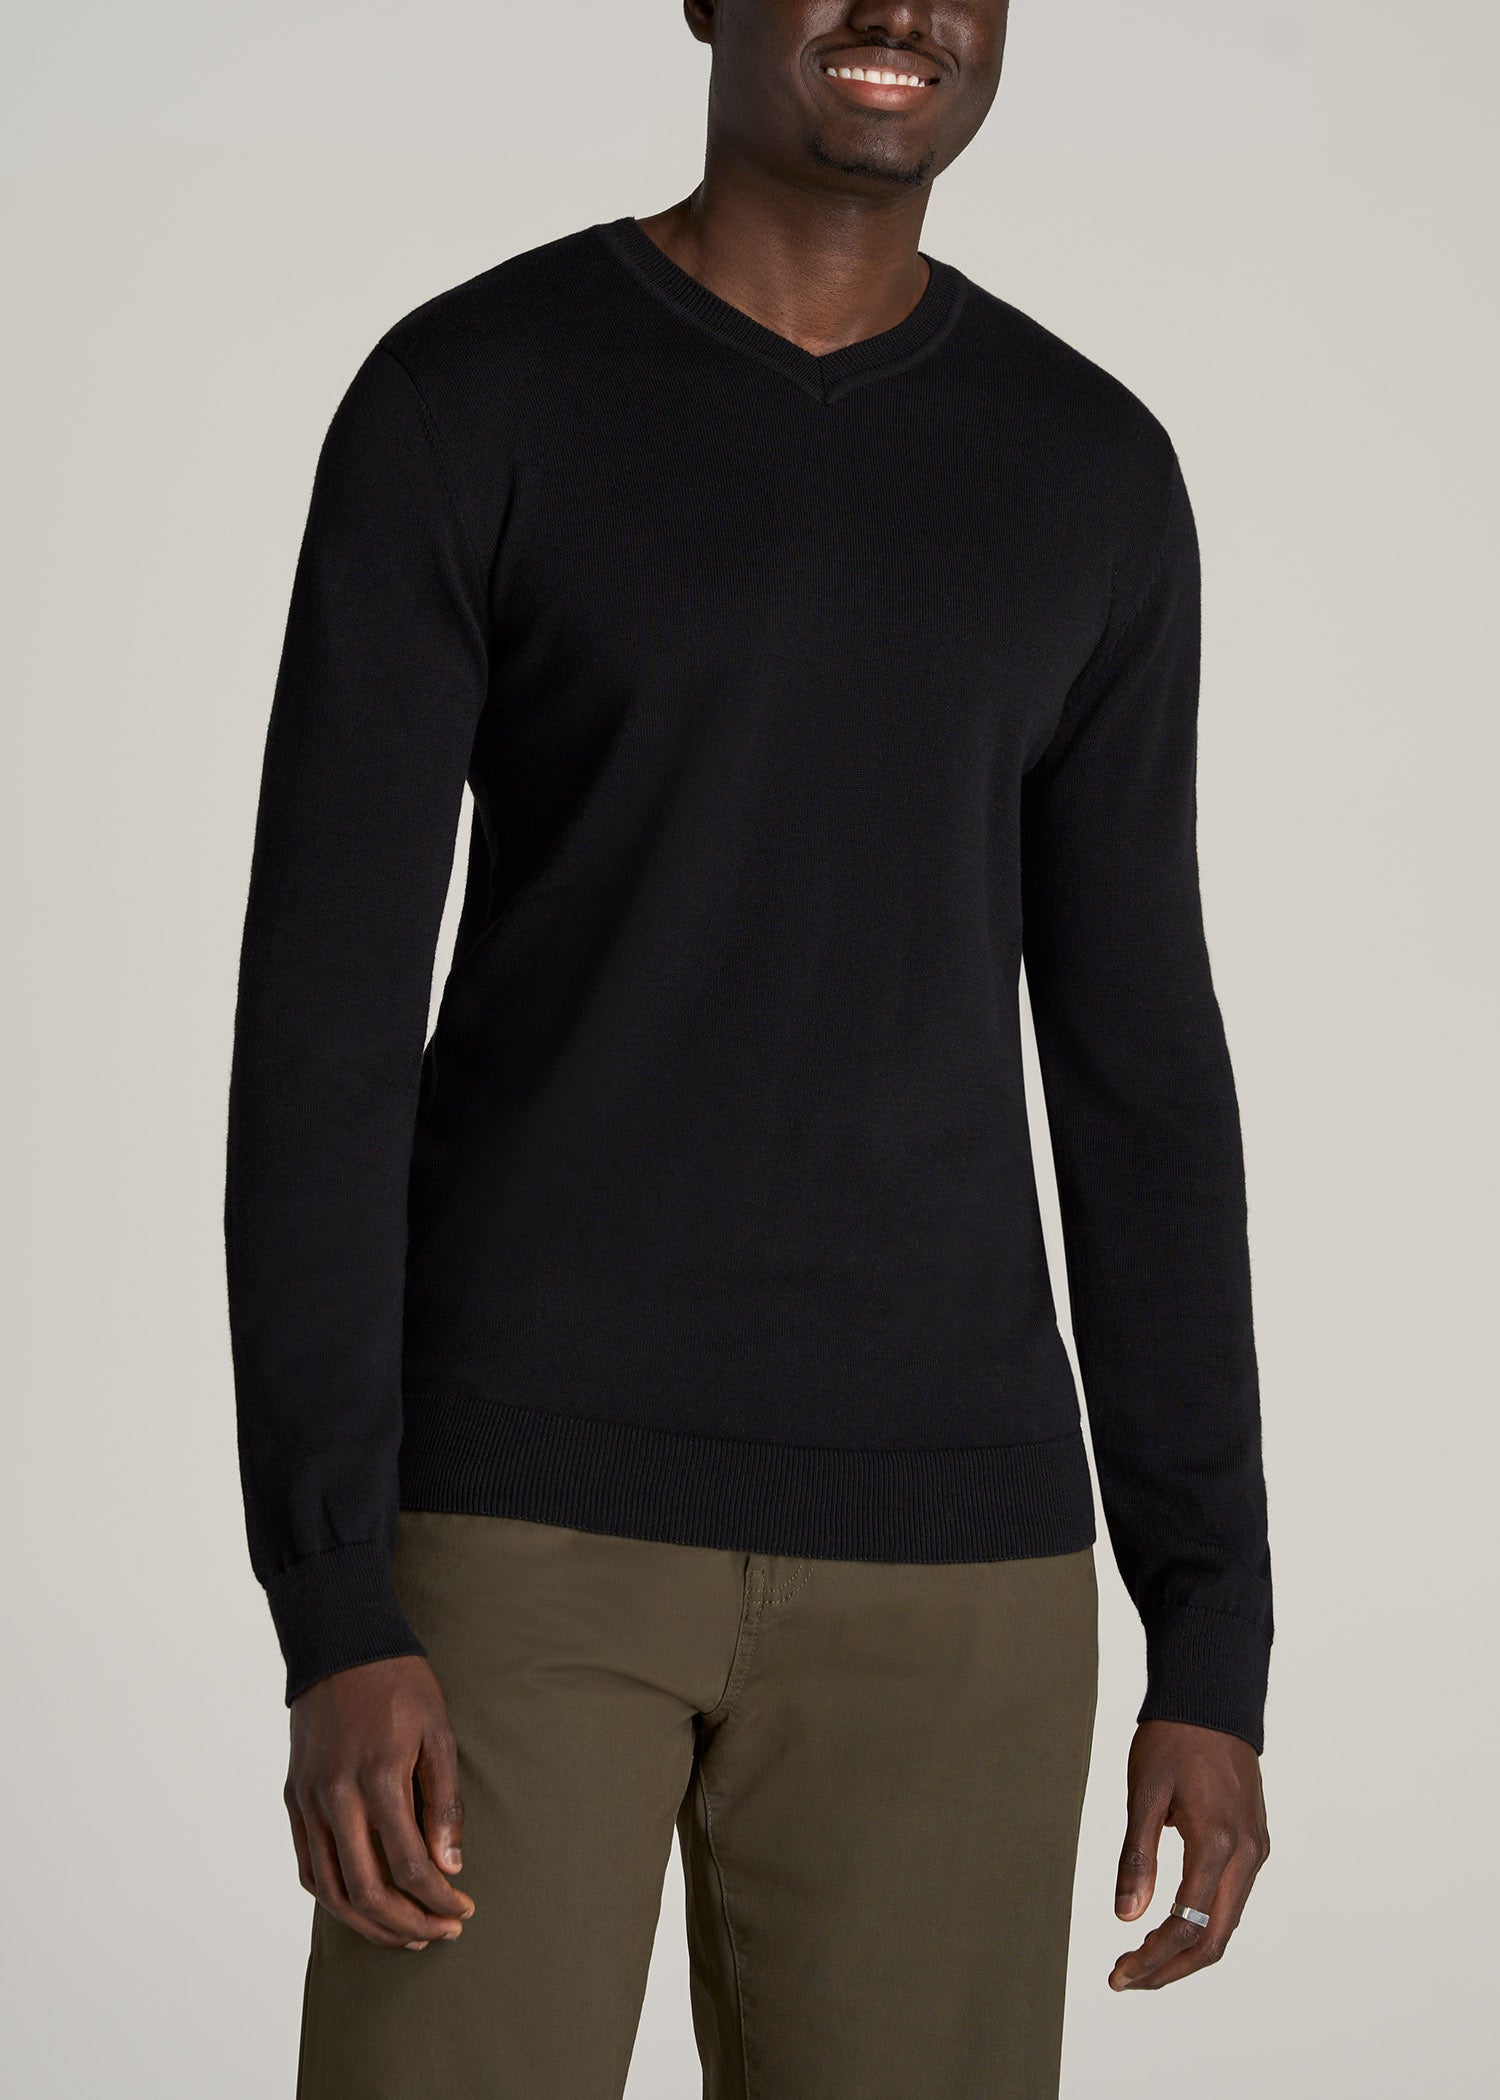    American-Tall-Men-Everyday-V-Neck-Sweater-Black-front